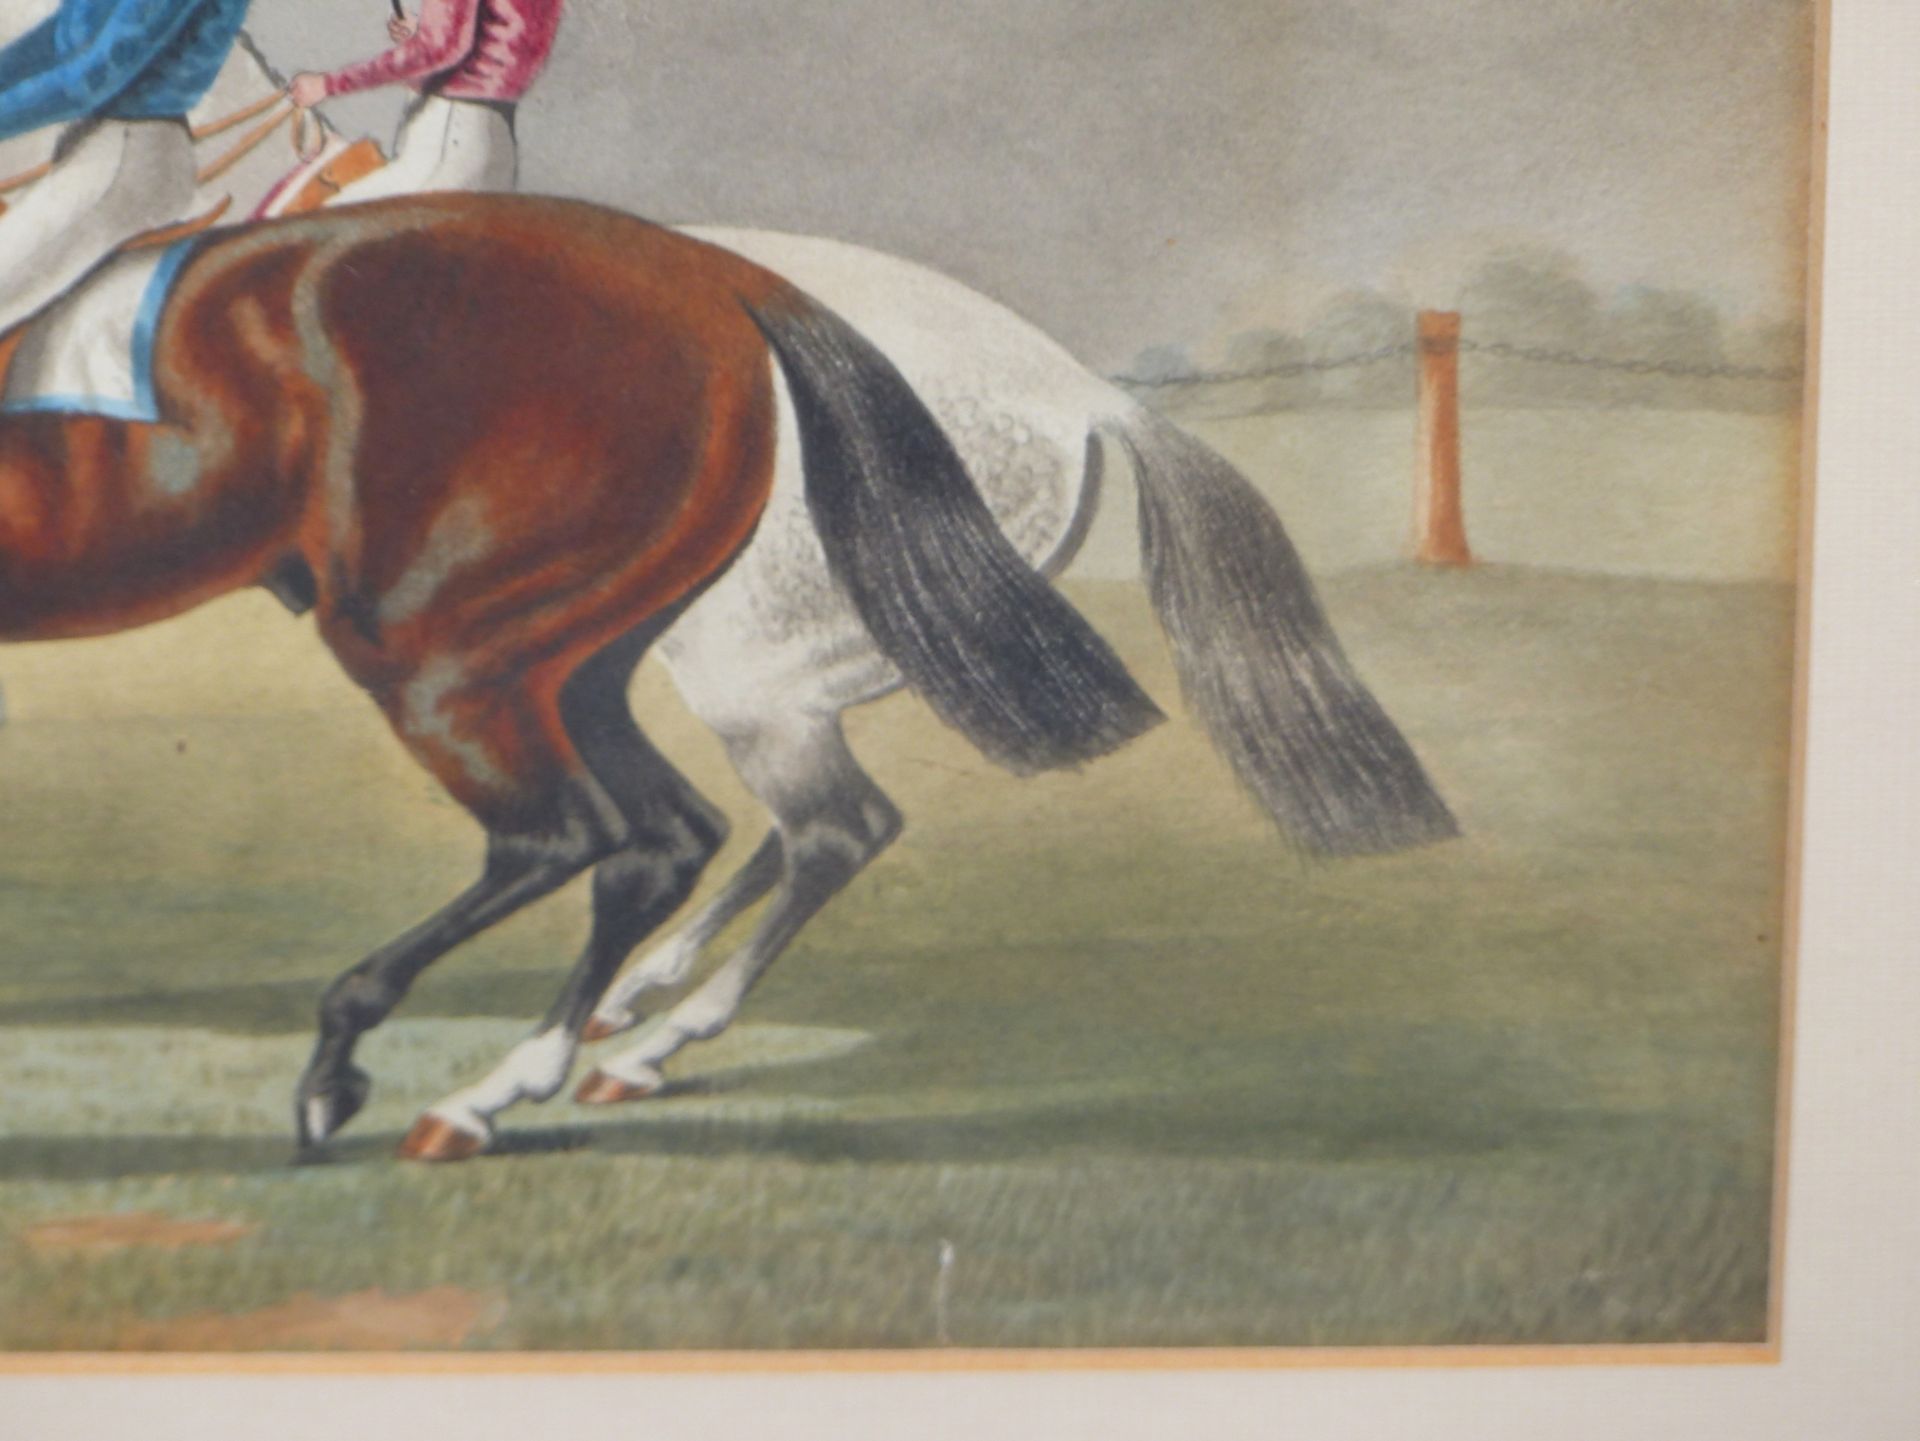 19th C. ENGLISH SCHOOL DANIEL O'ROUKE WINNING HE DERBY 1852, REPUTEDLY BY JAMES G. NOBLE, - Image 18 of 26